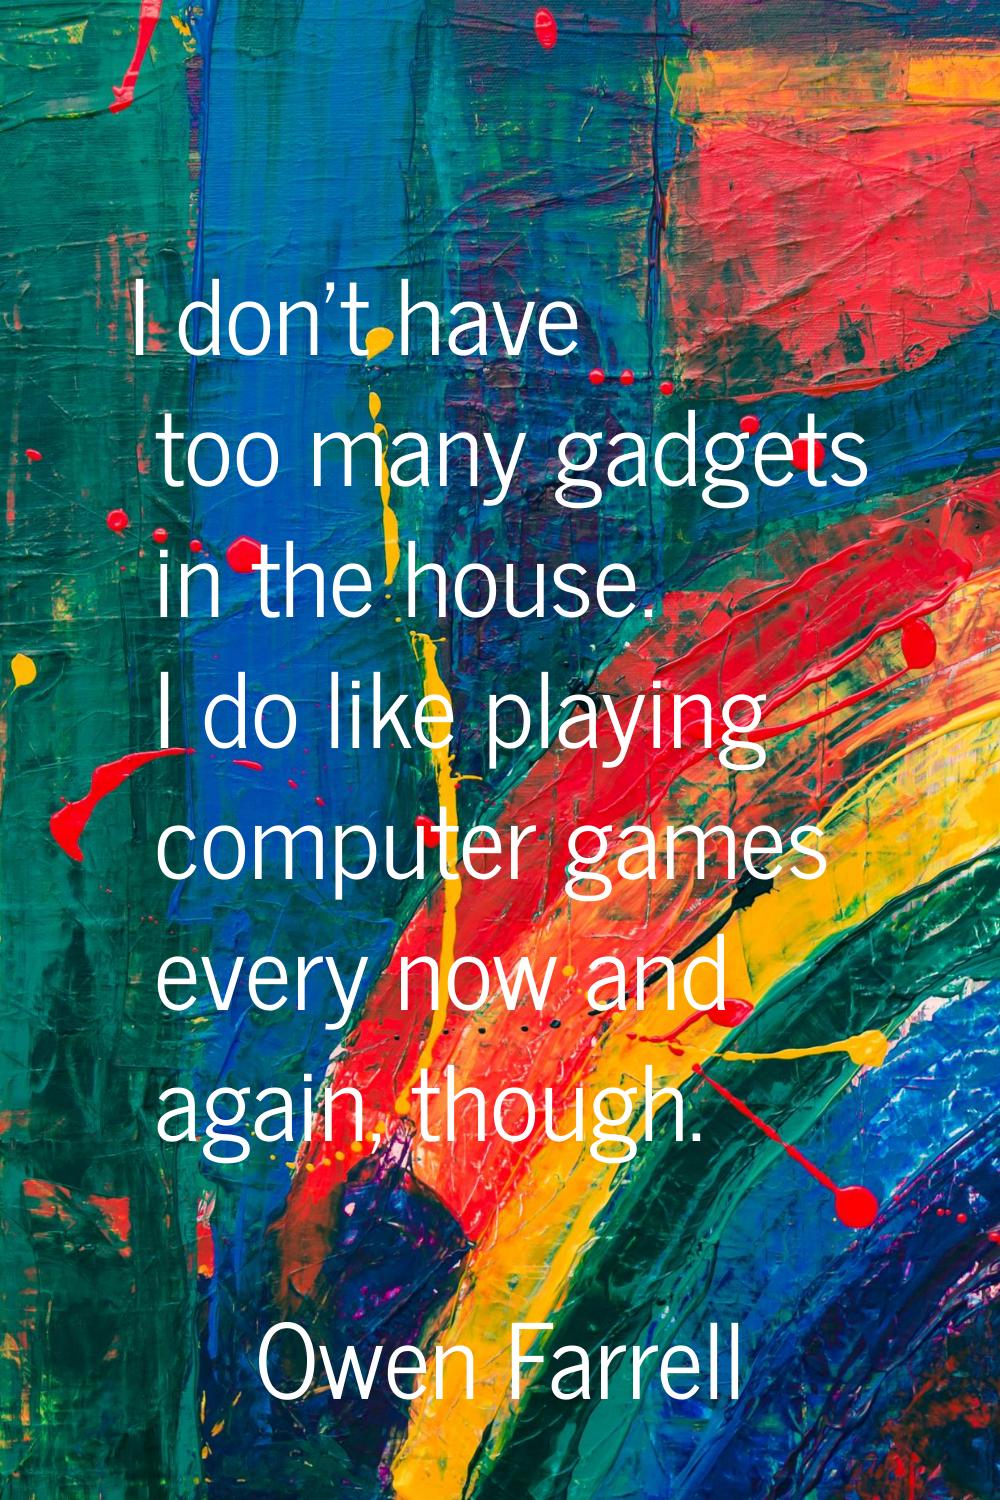 I don't have too many gadgets in the house. I do like playing computer games every now and again, t